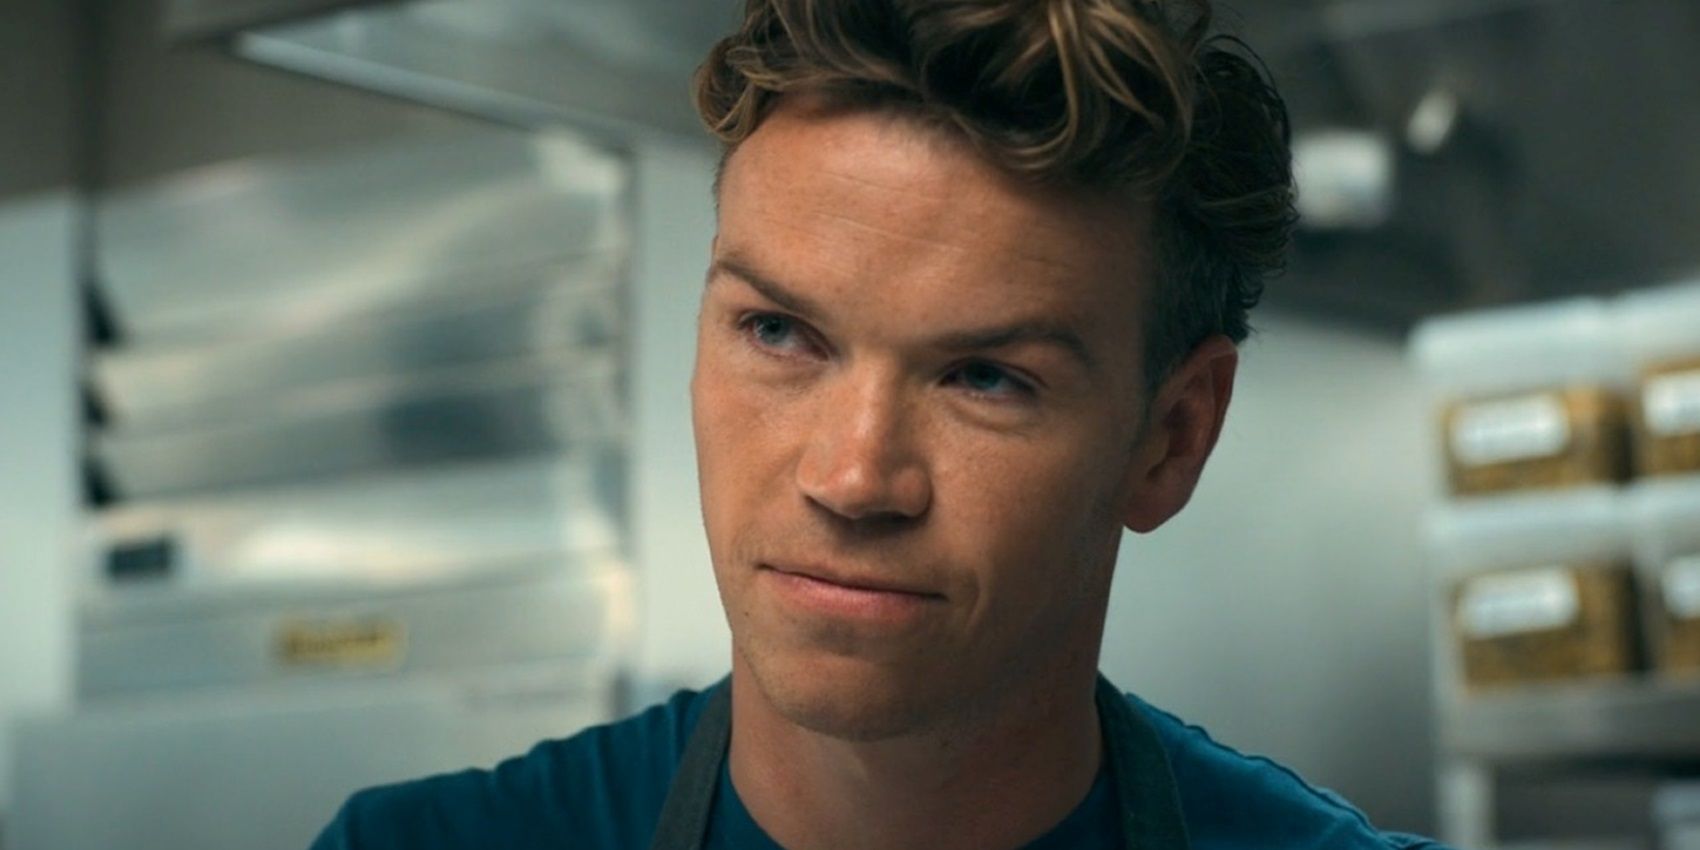 Chef Luca (Will Poulter) smiling in The Bear ​​​​​​​season 2.